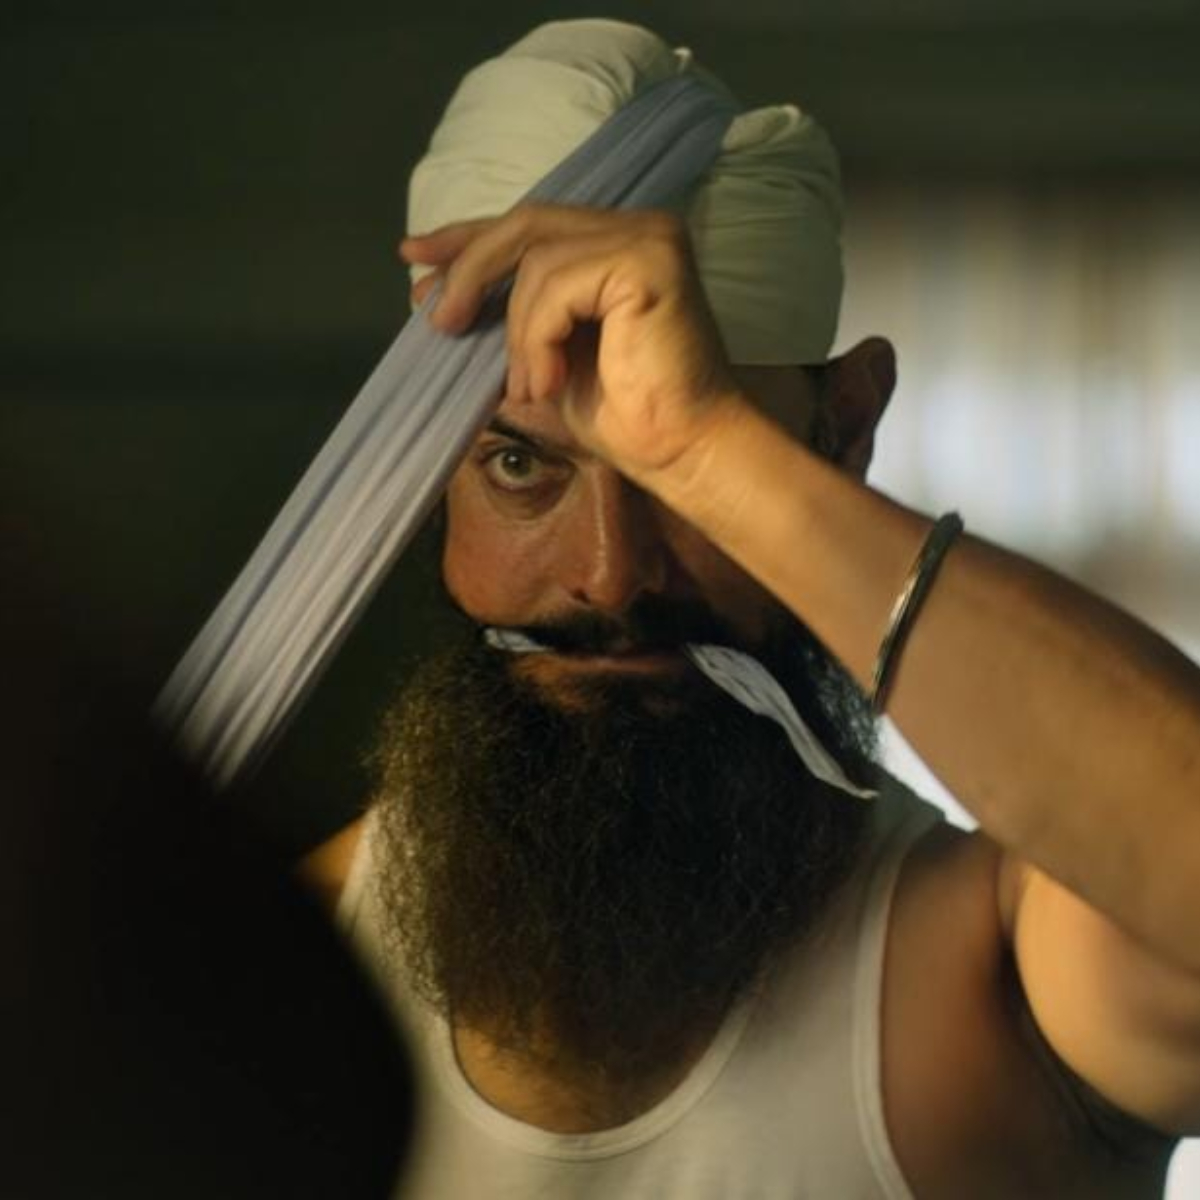 Laal Singh Chaddha Extended Weekend Box Office: Aamir Khan's films stays low with Rs 46.25 crore in 5 days